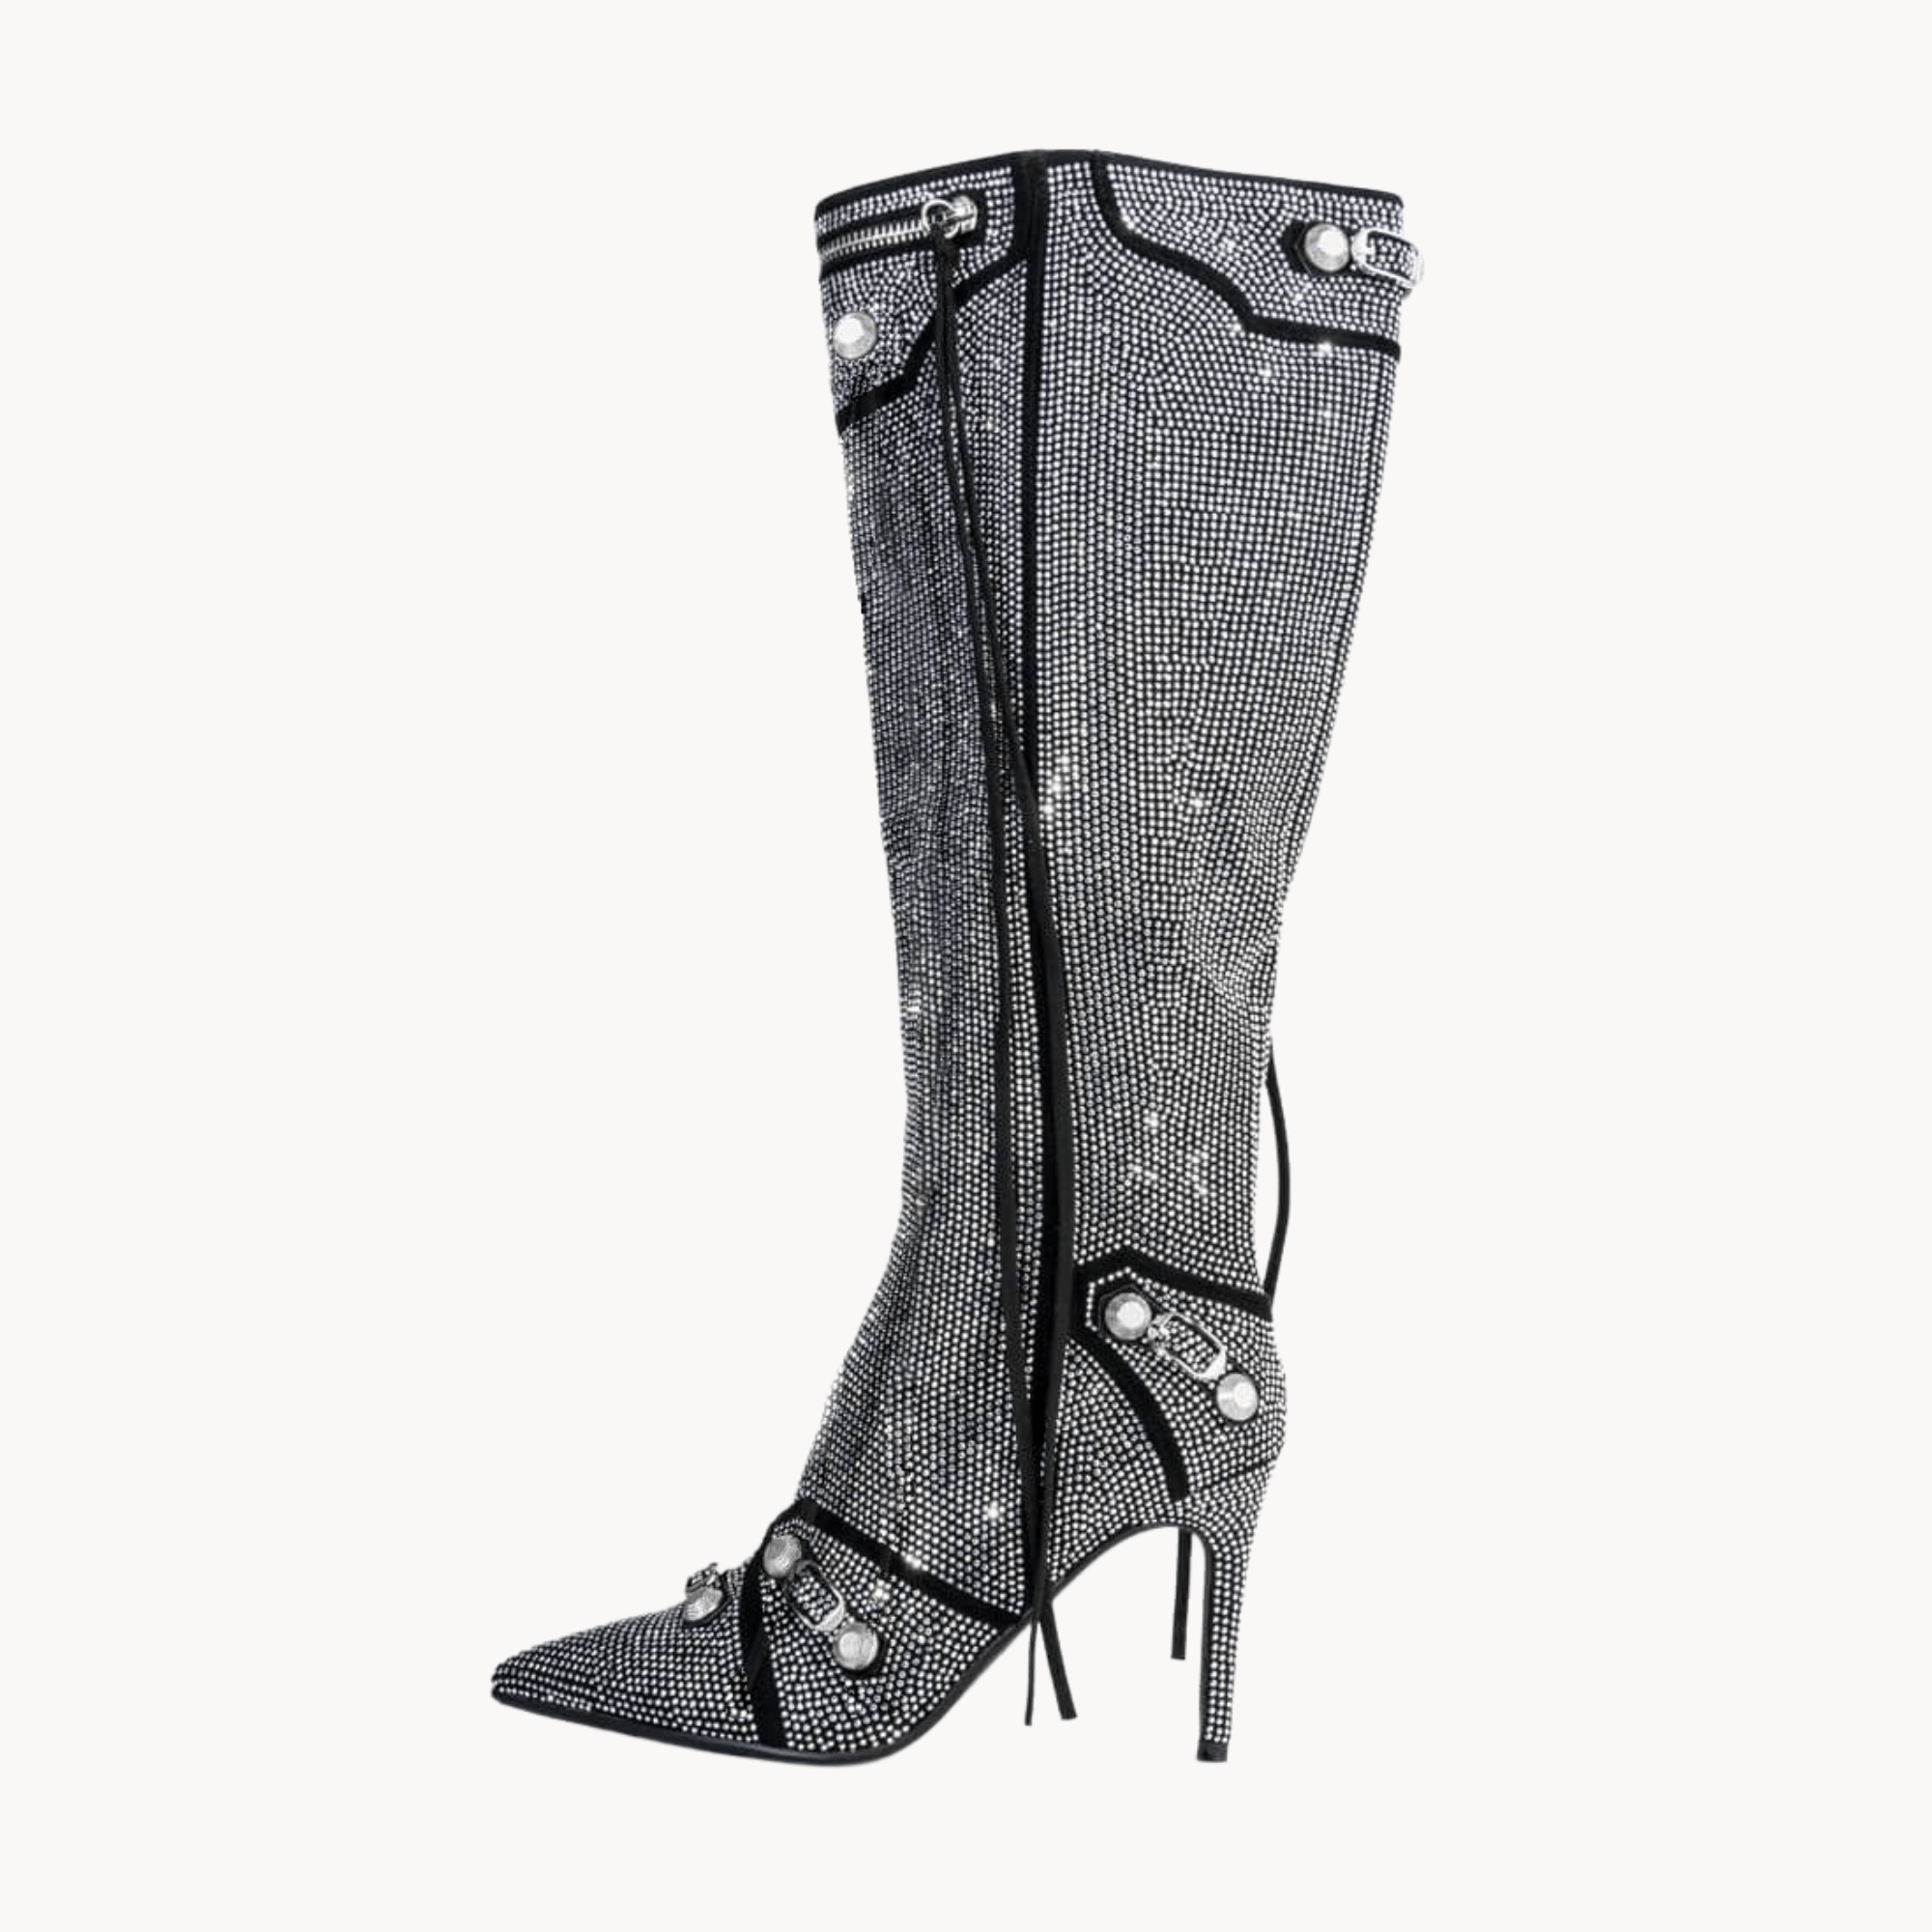 Crystals and Tassels Stiletto Boots - Kelly Obi New York